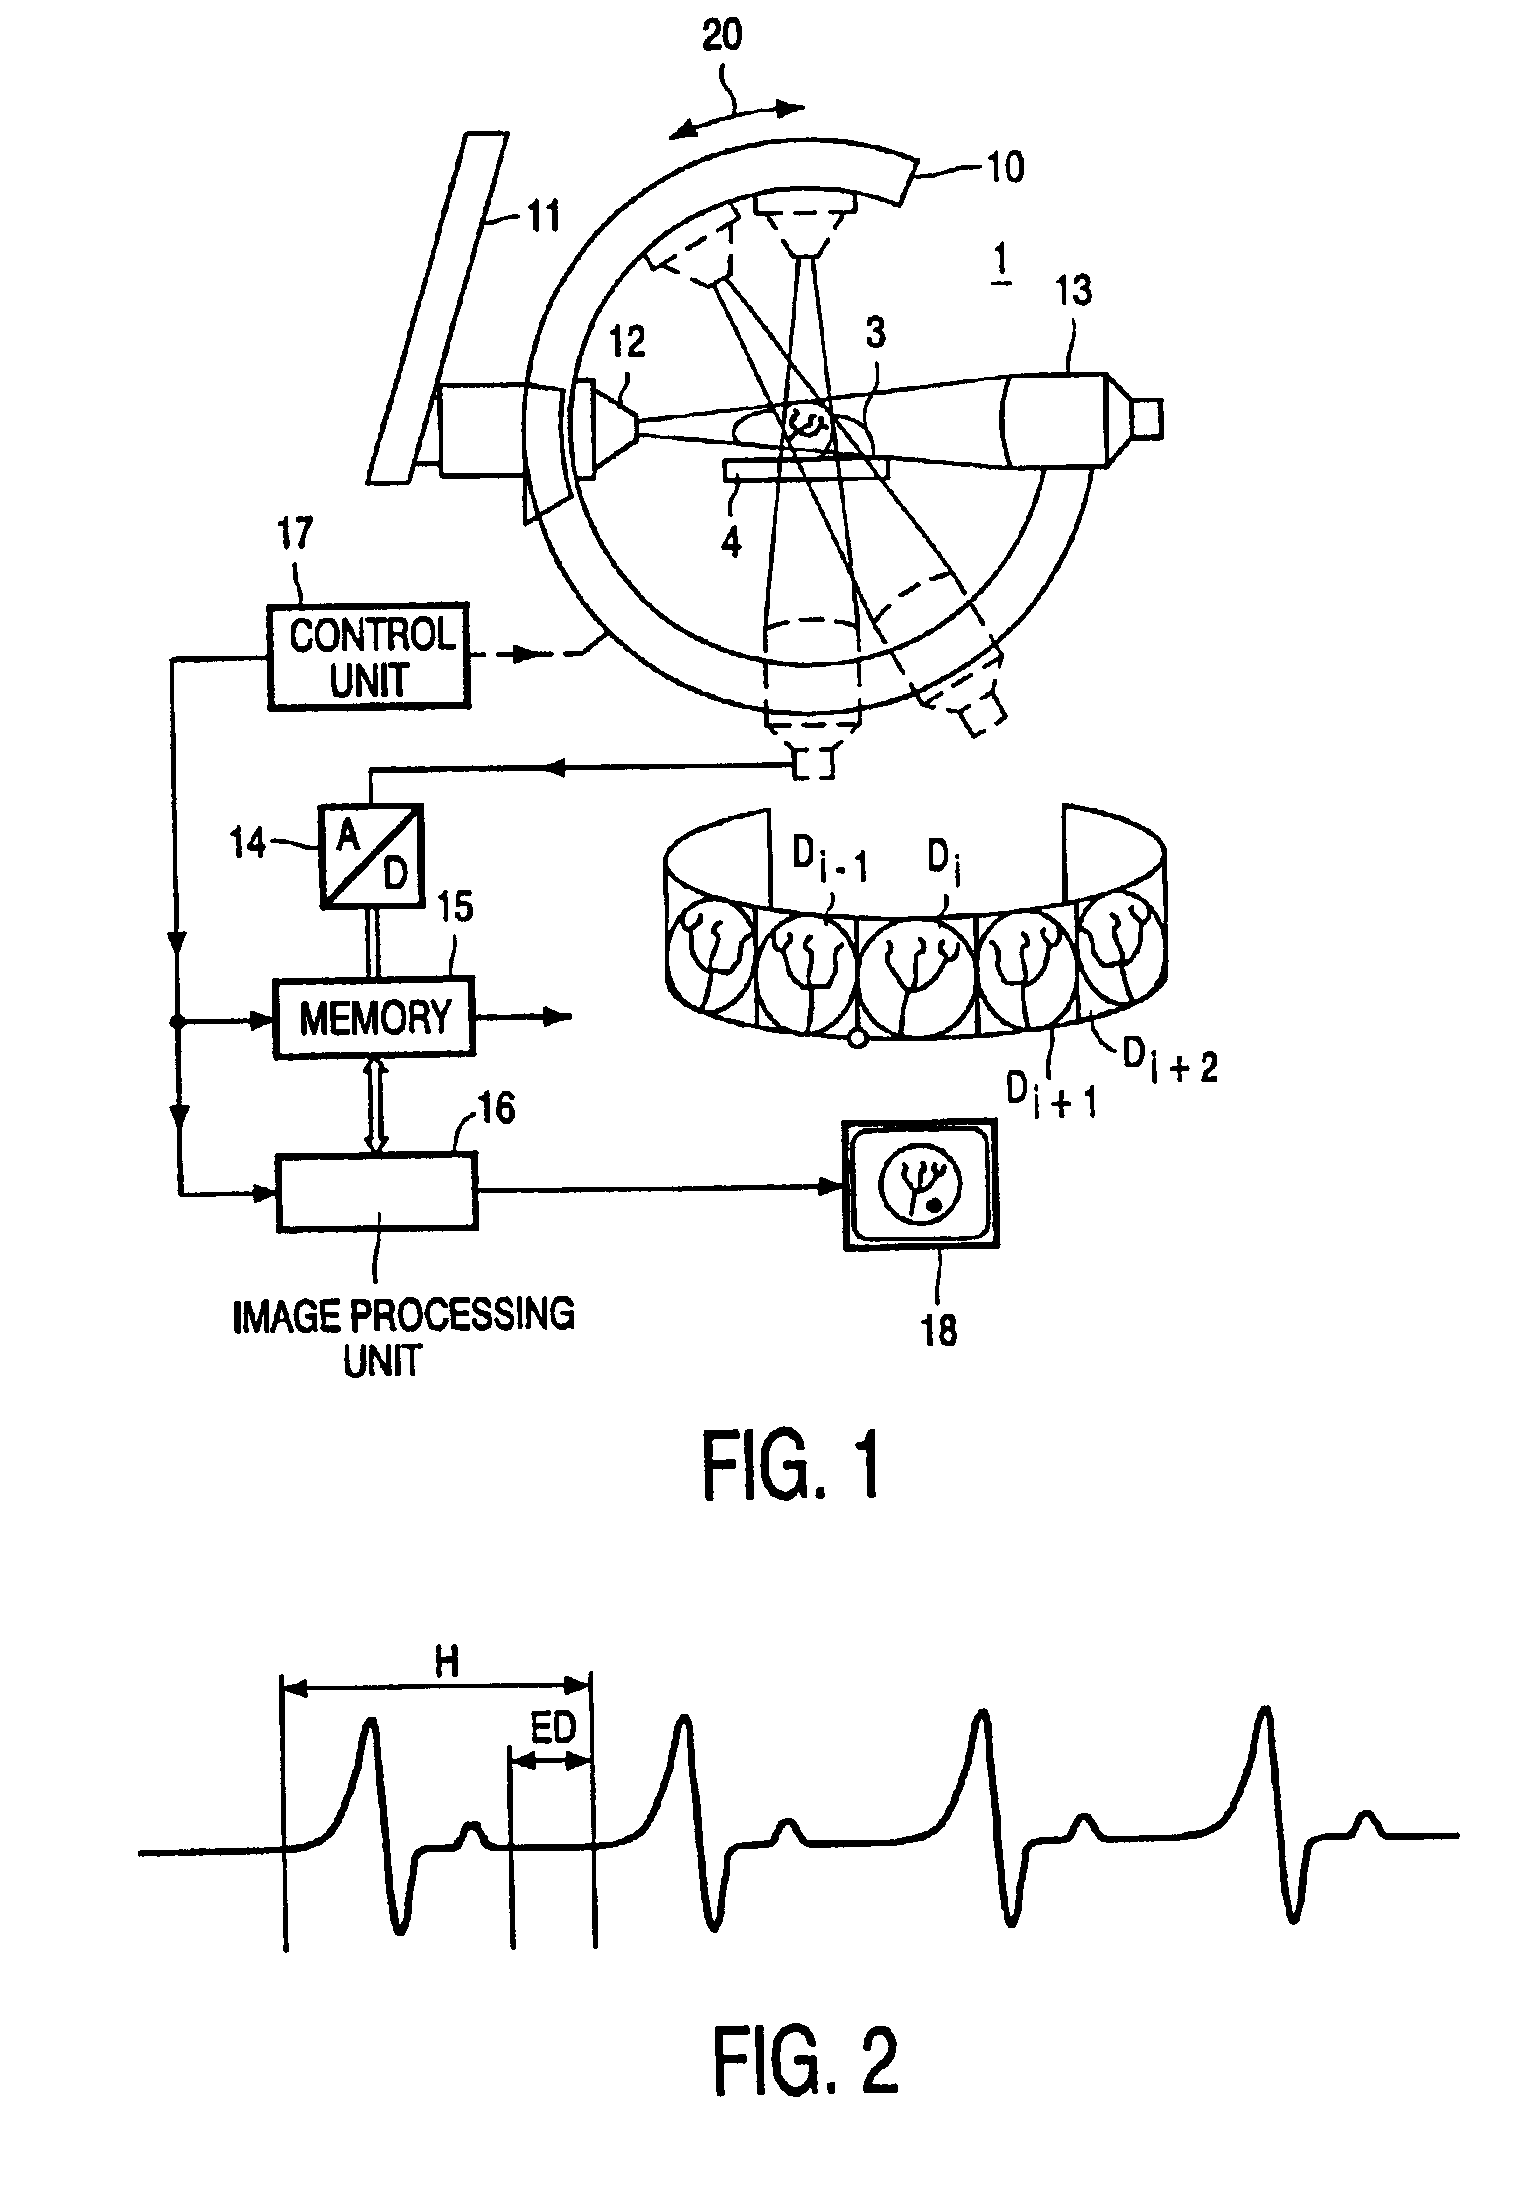 X-ray imaging method and a 3D-rotational X-ray apparatus for applying this method